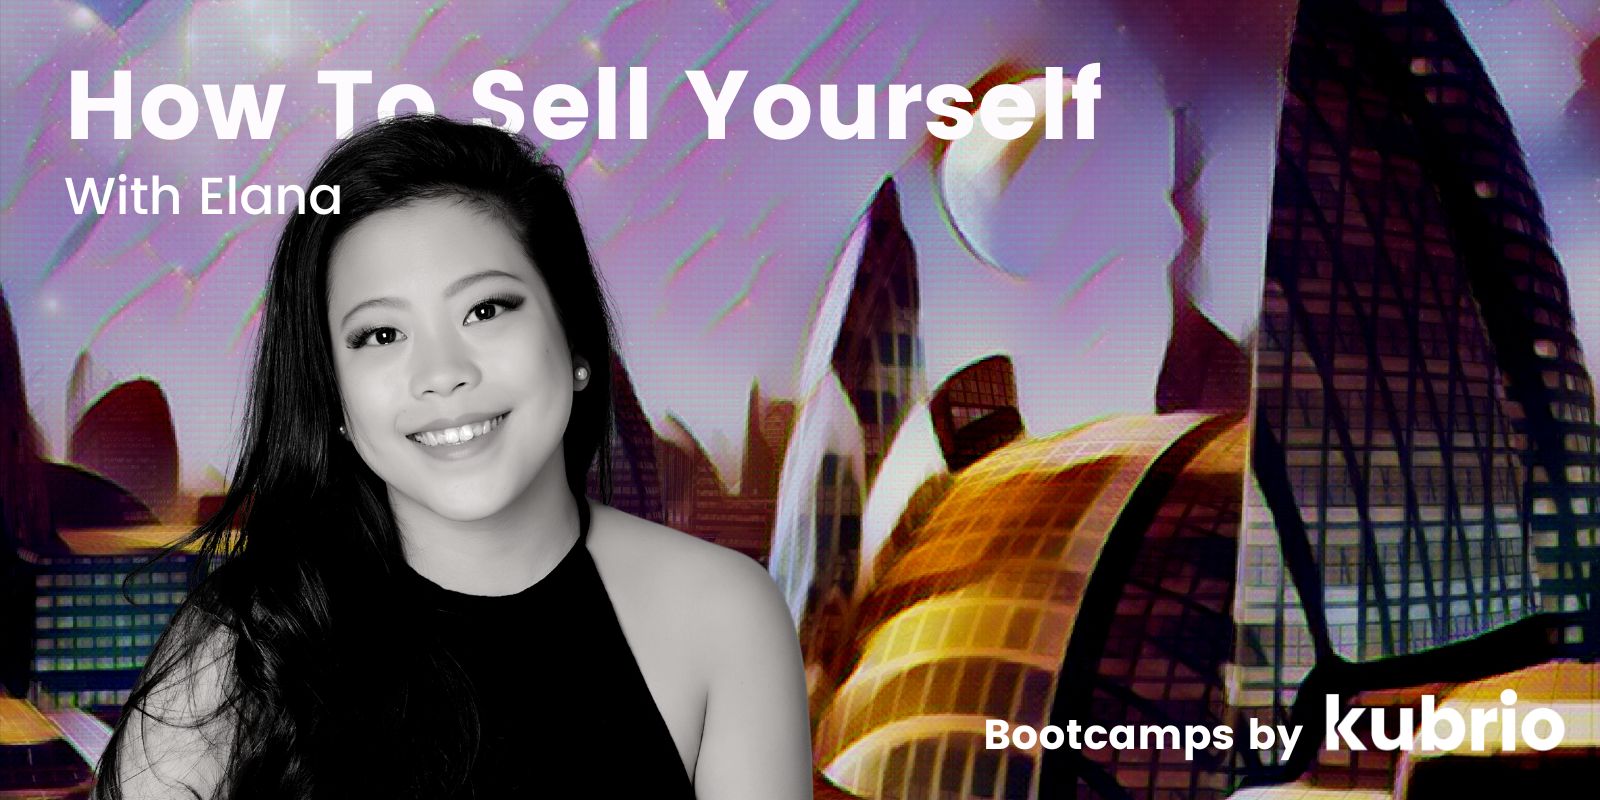 How to Sell Yourself Successfully // May 23